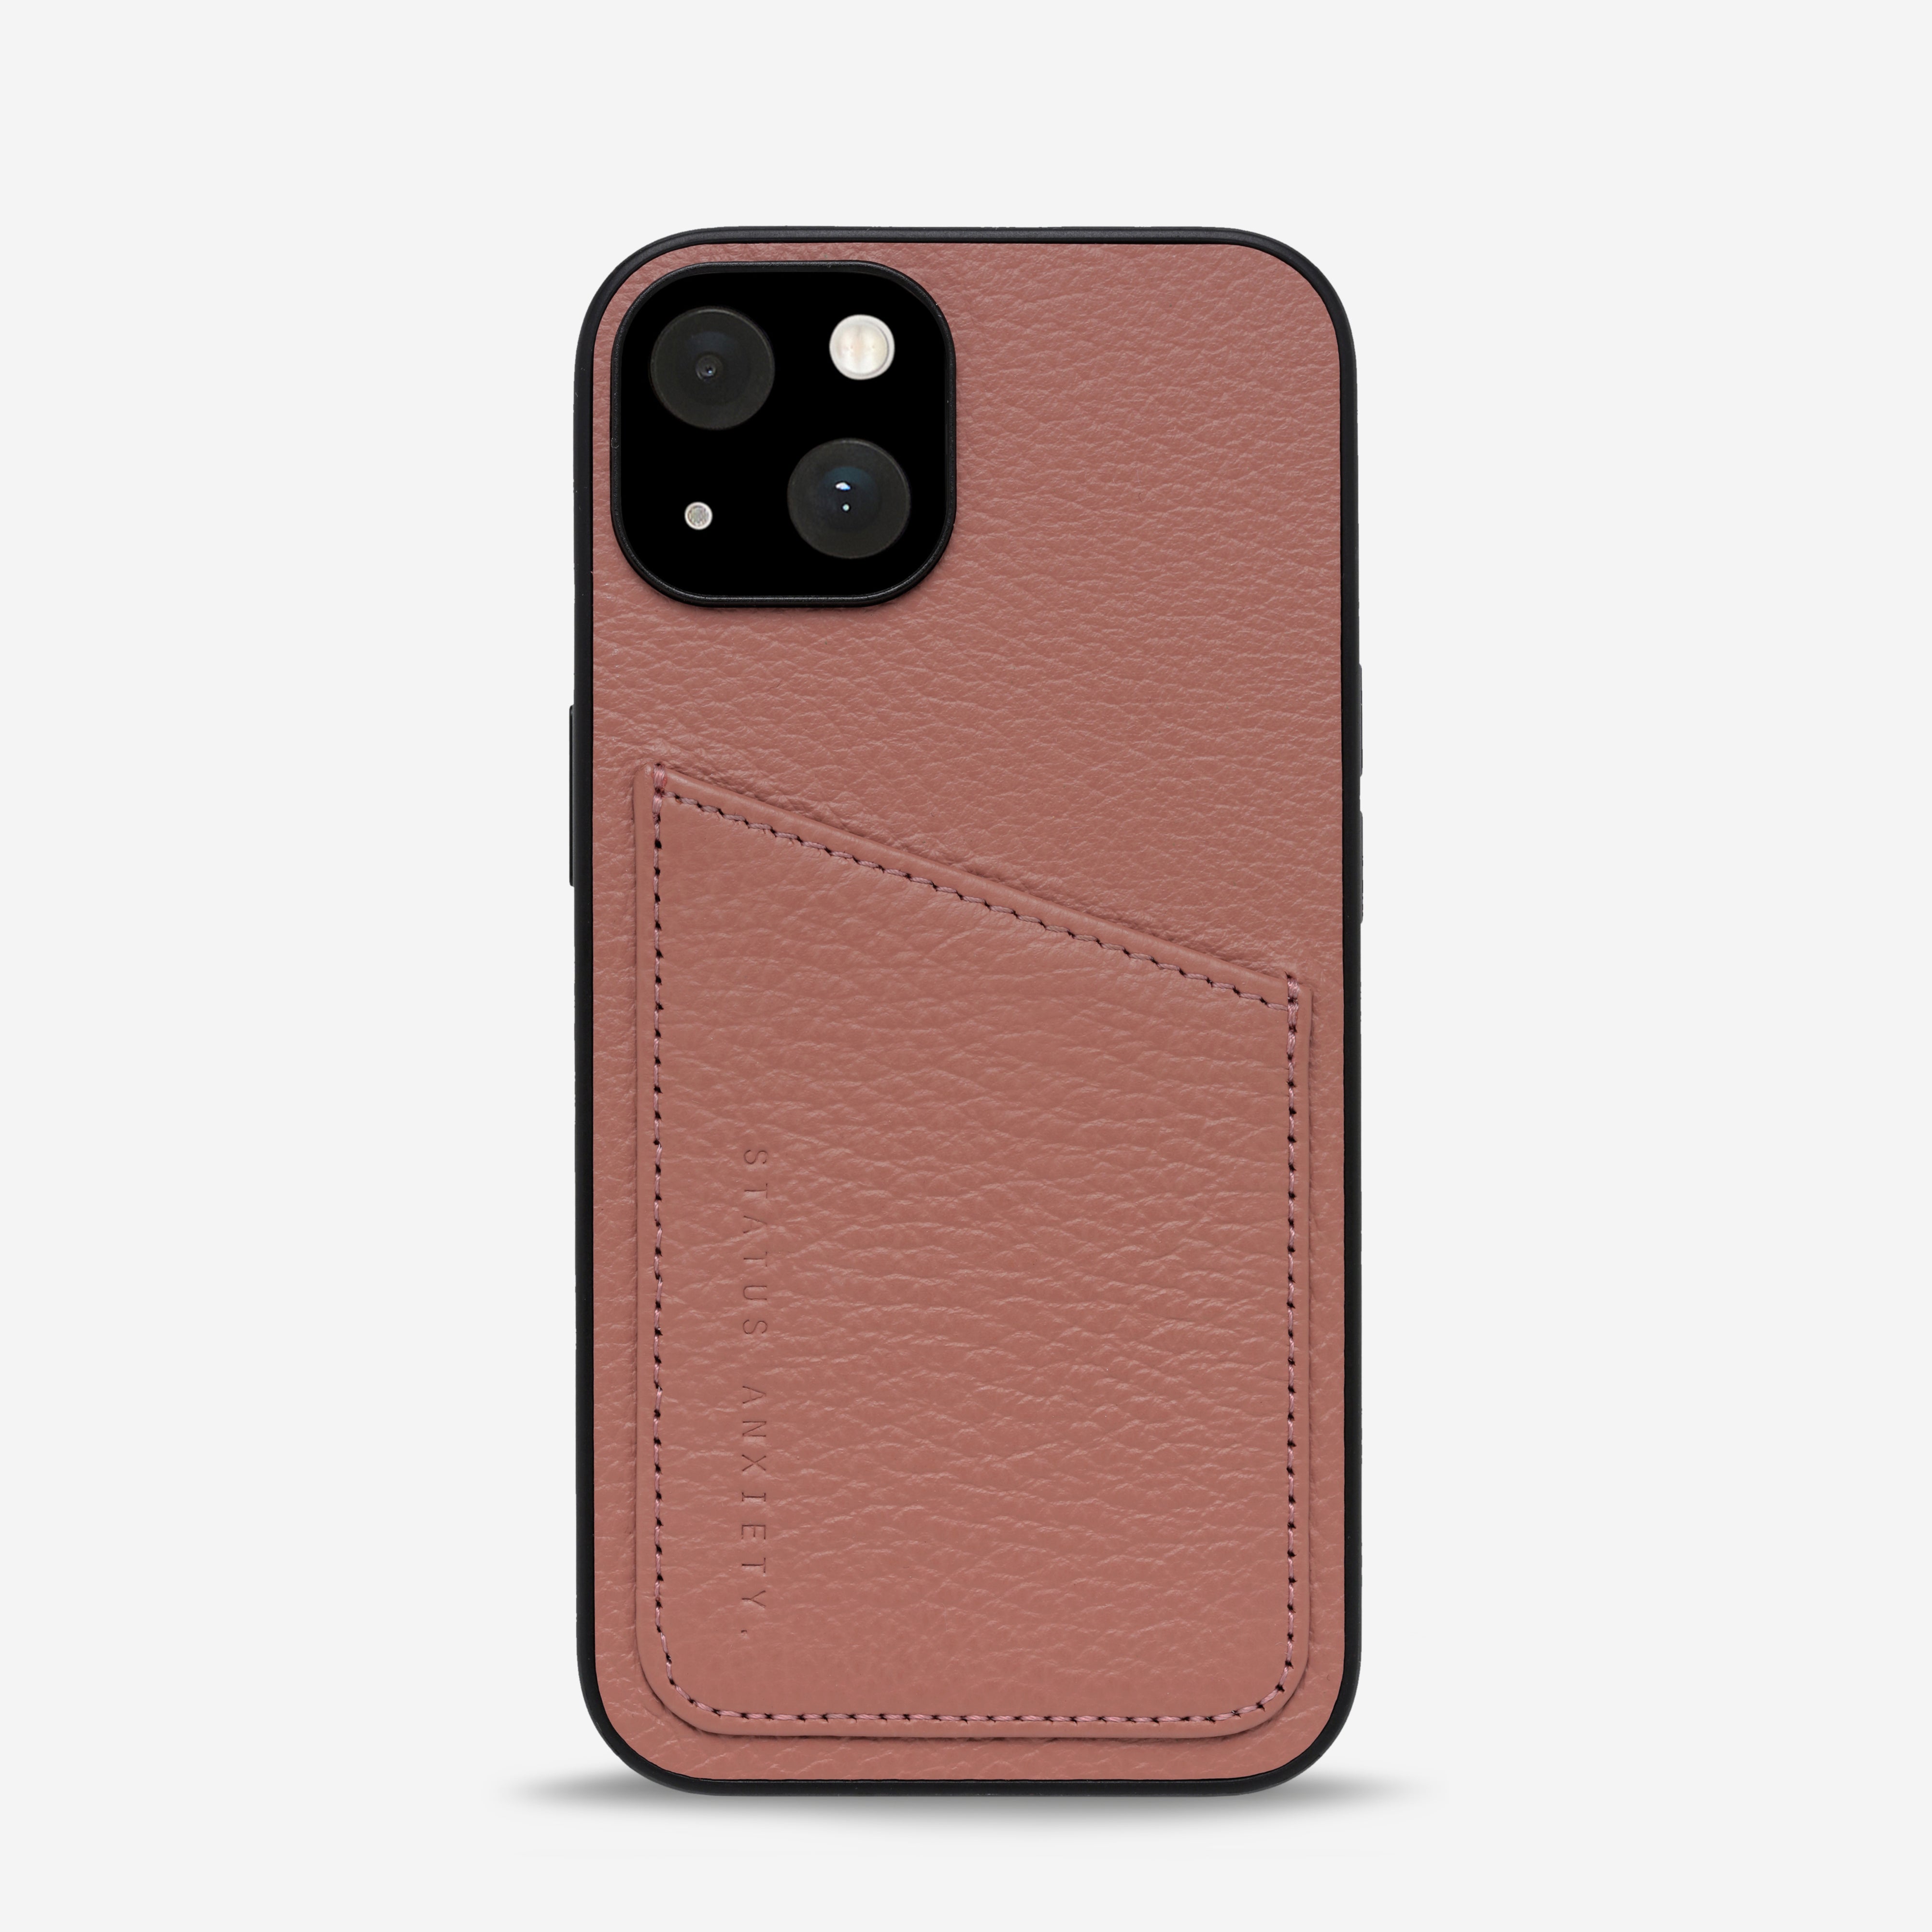 Who's Who Phone Case - Dusty Rose